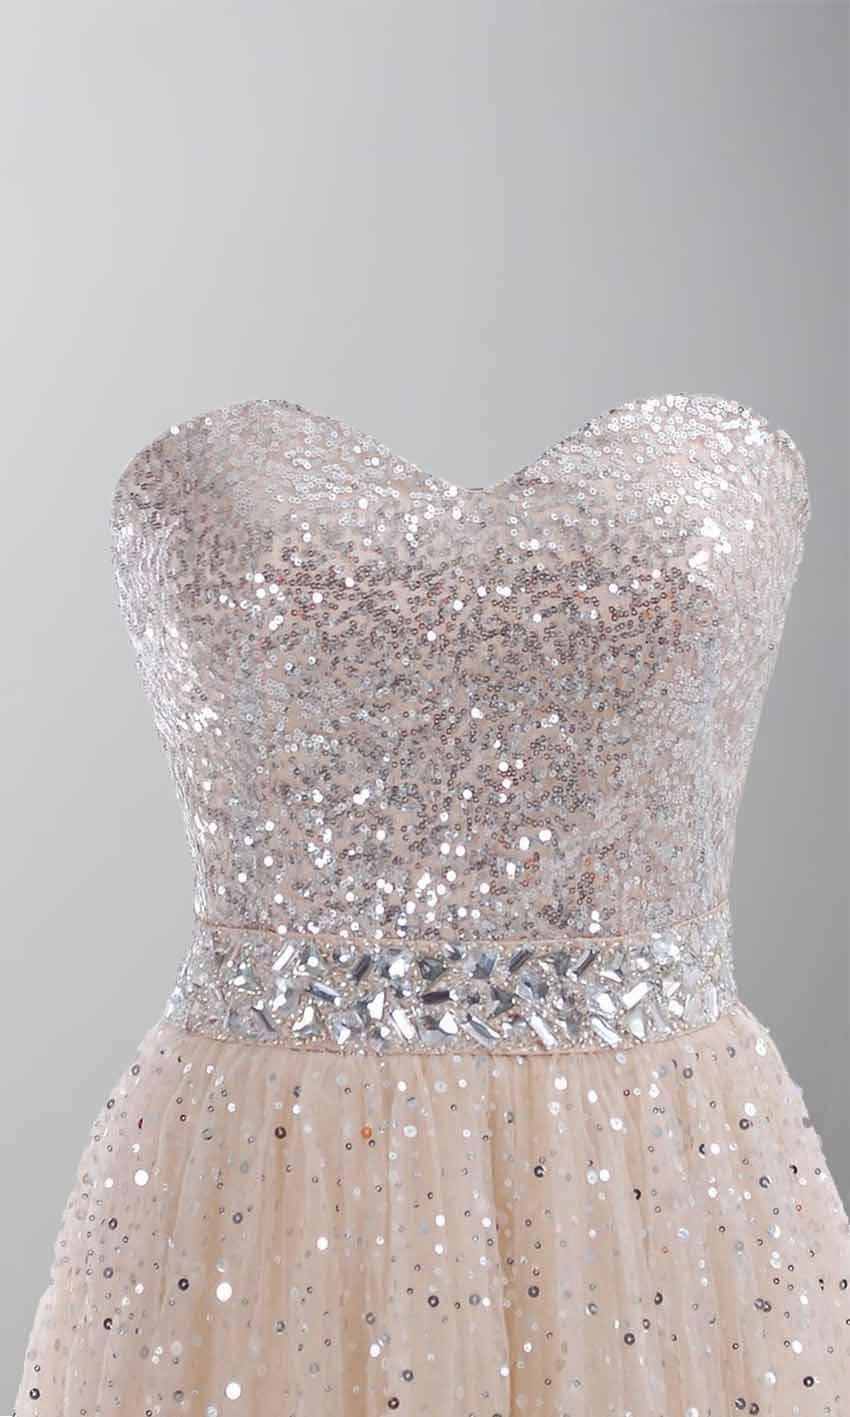 Hochzeit - Champagne Sequin Sweetheart Long Prom Gowns KSP254 [KSP254] - £109.00 : Cheap Prom Dresses Uk, Bridesmaid Dresses, 2014 Prom & Evening Dresses, Look for cheap elegant prom dresses 2014, cocktail gowns, or dresses for special occasions? kissprom.co.uk offe